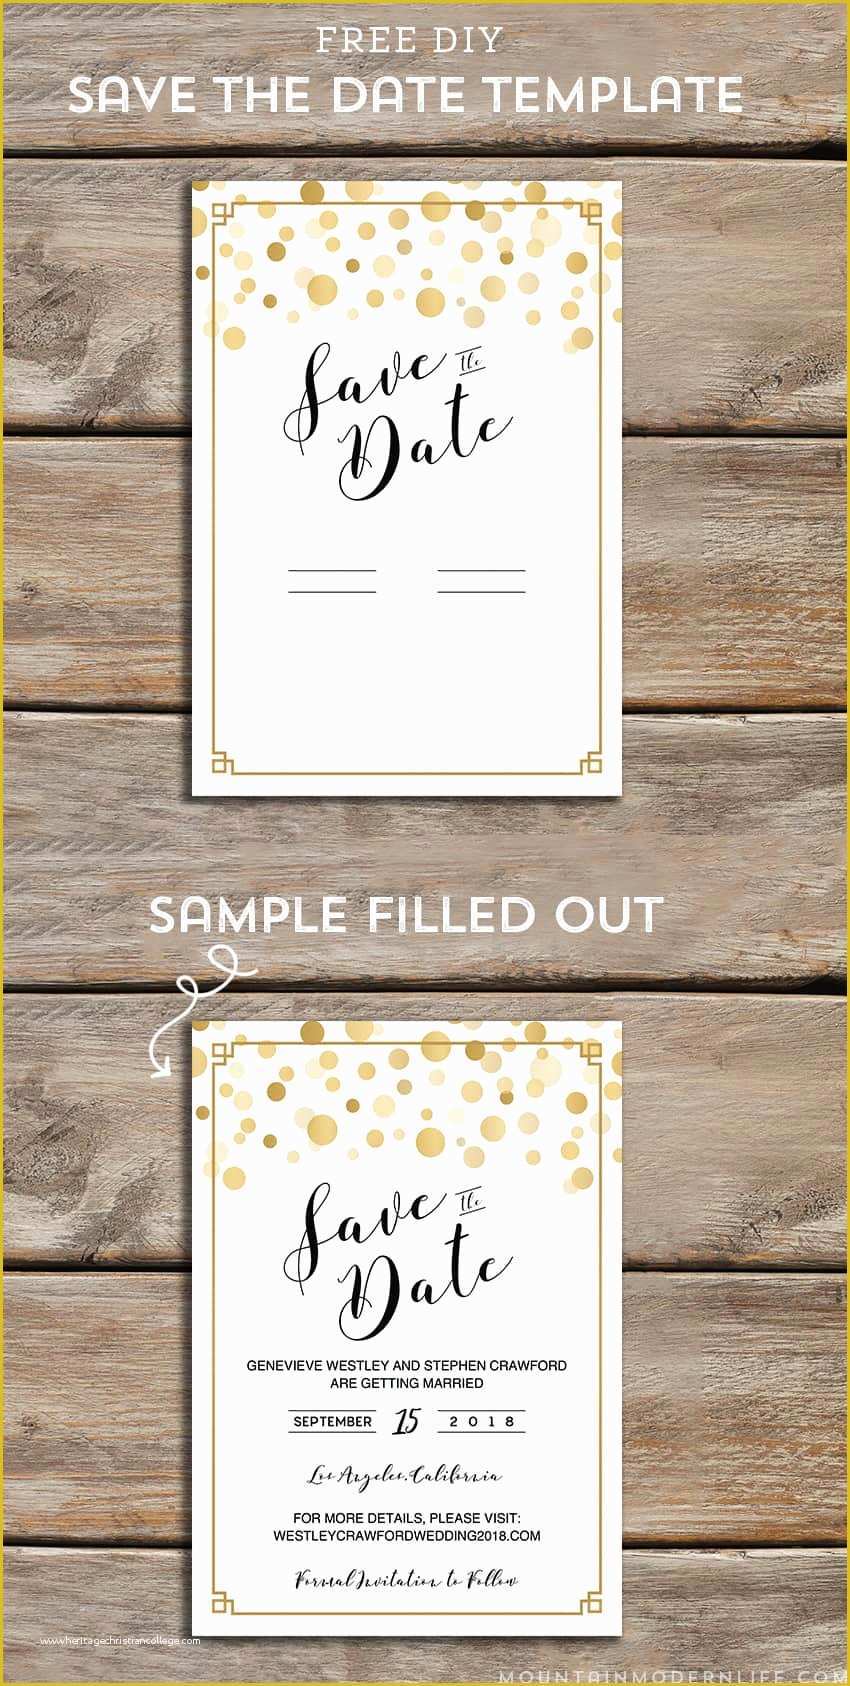 Save the Date Template Free Download Of Modern Diy Save the Date Free Printable